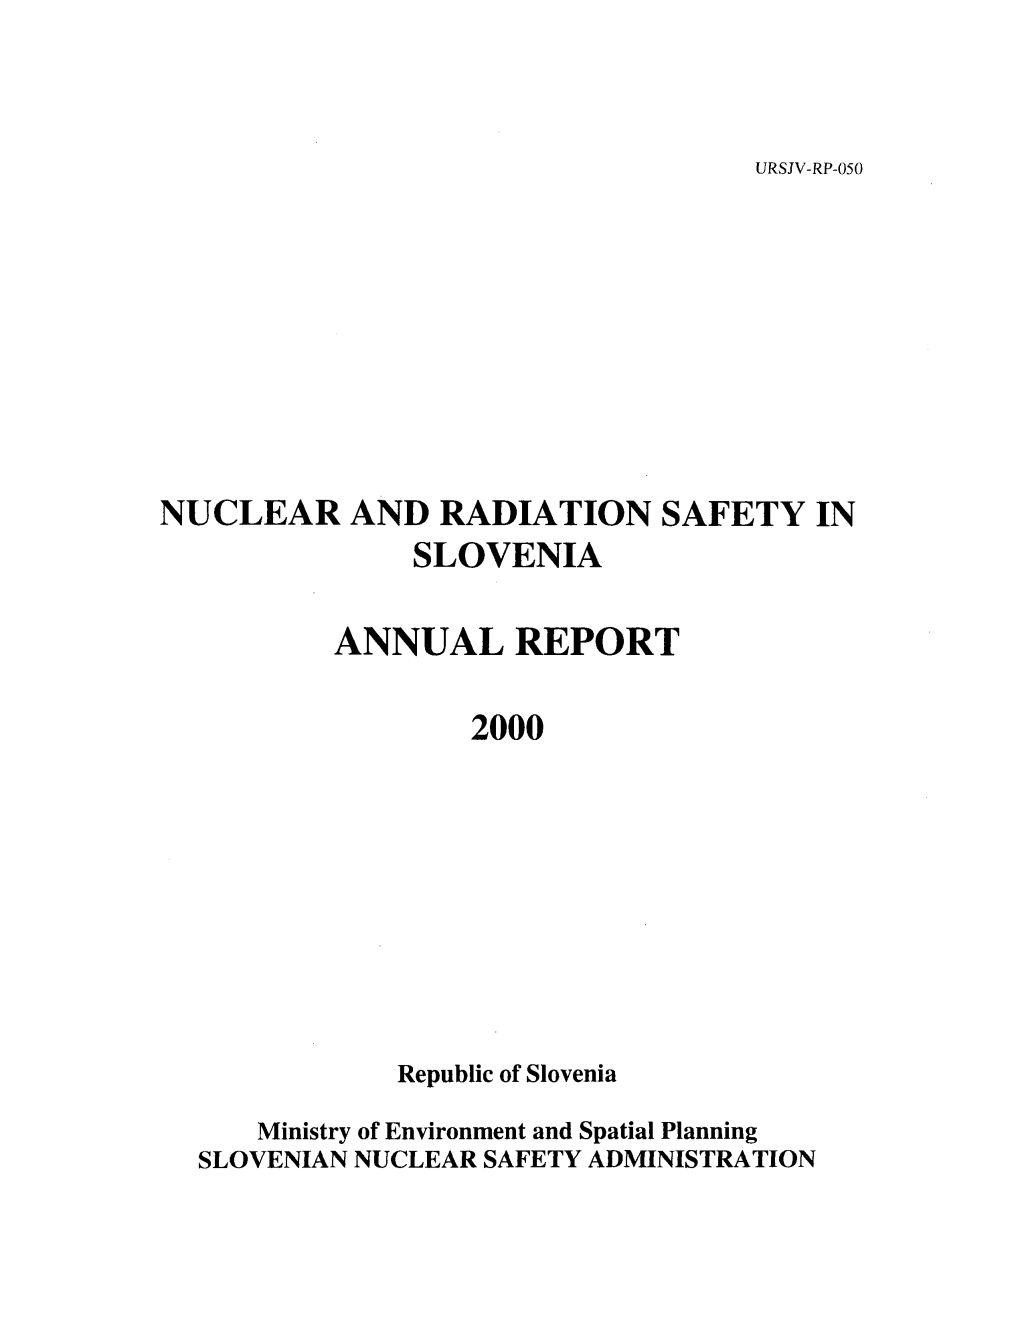 Nuclear and Radiation Safety in Slovenia Annual Report 2000